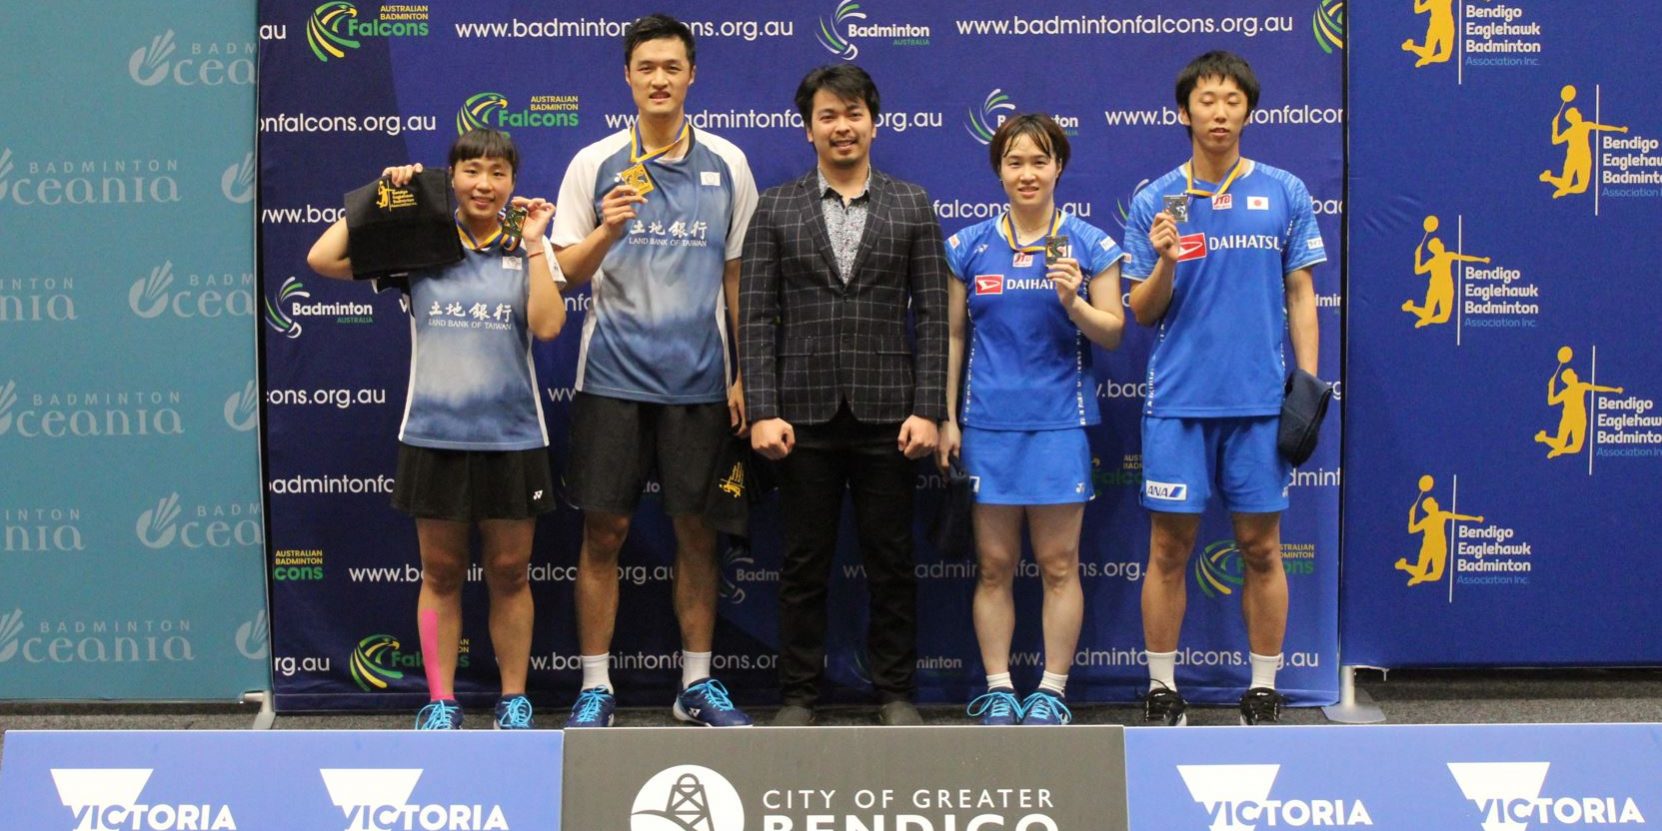 Another clean sweep for Chinese Taipei at the YONEX Bendigo International 2022